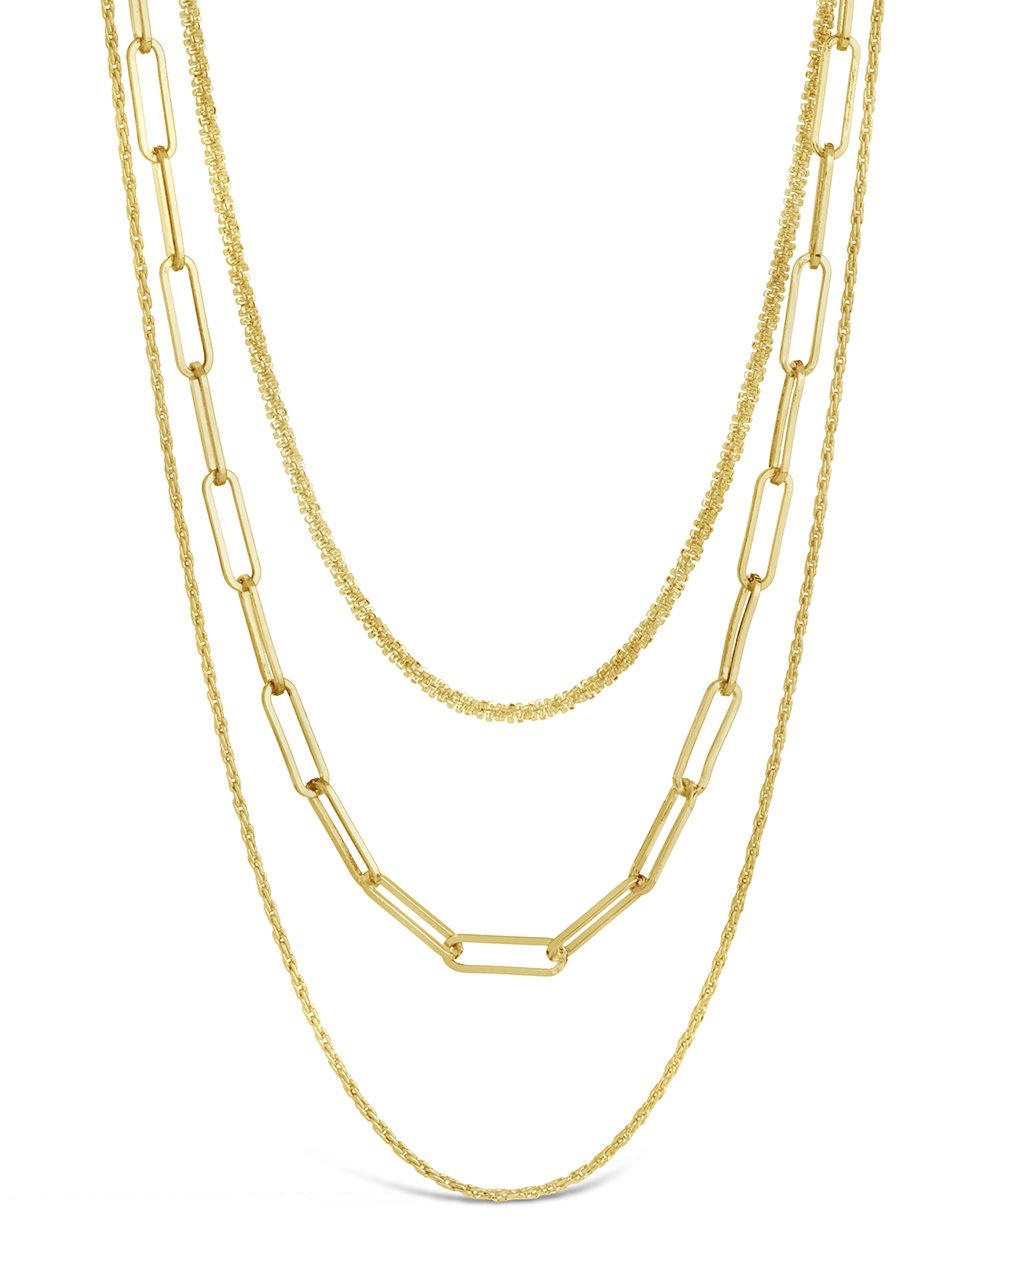 14K Gold 5 Strand Knotted Mesh Necklace